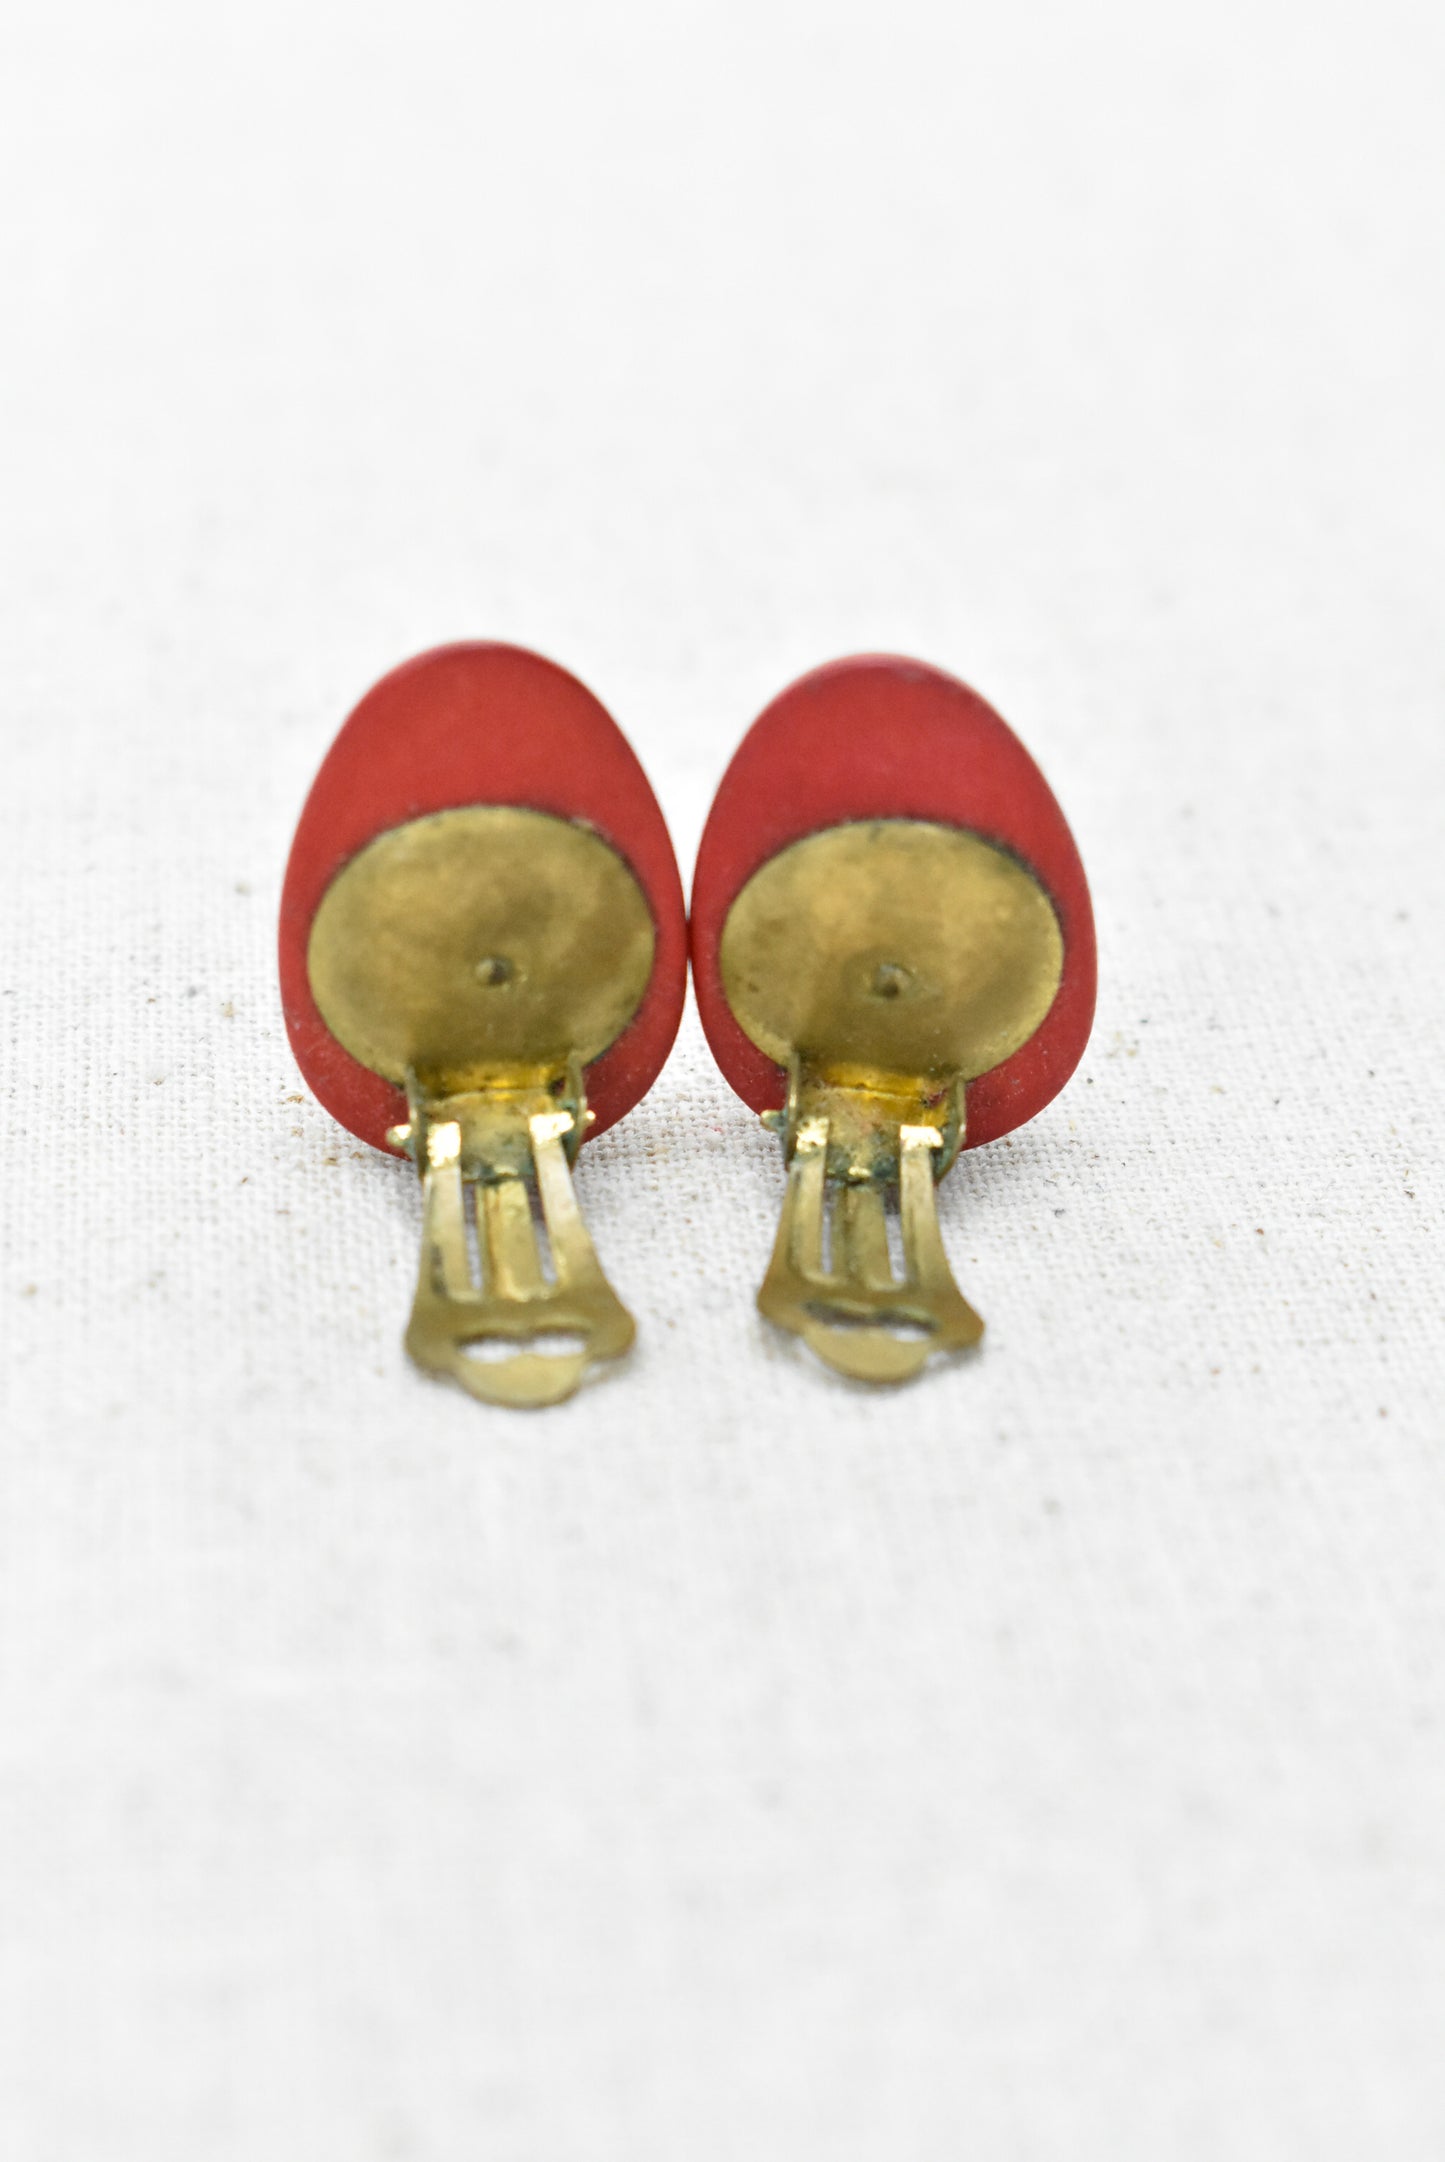 Retro red wooden clip on earrings